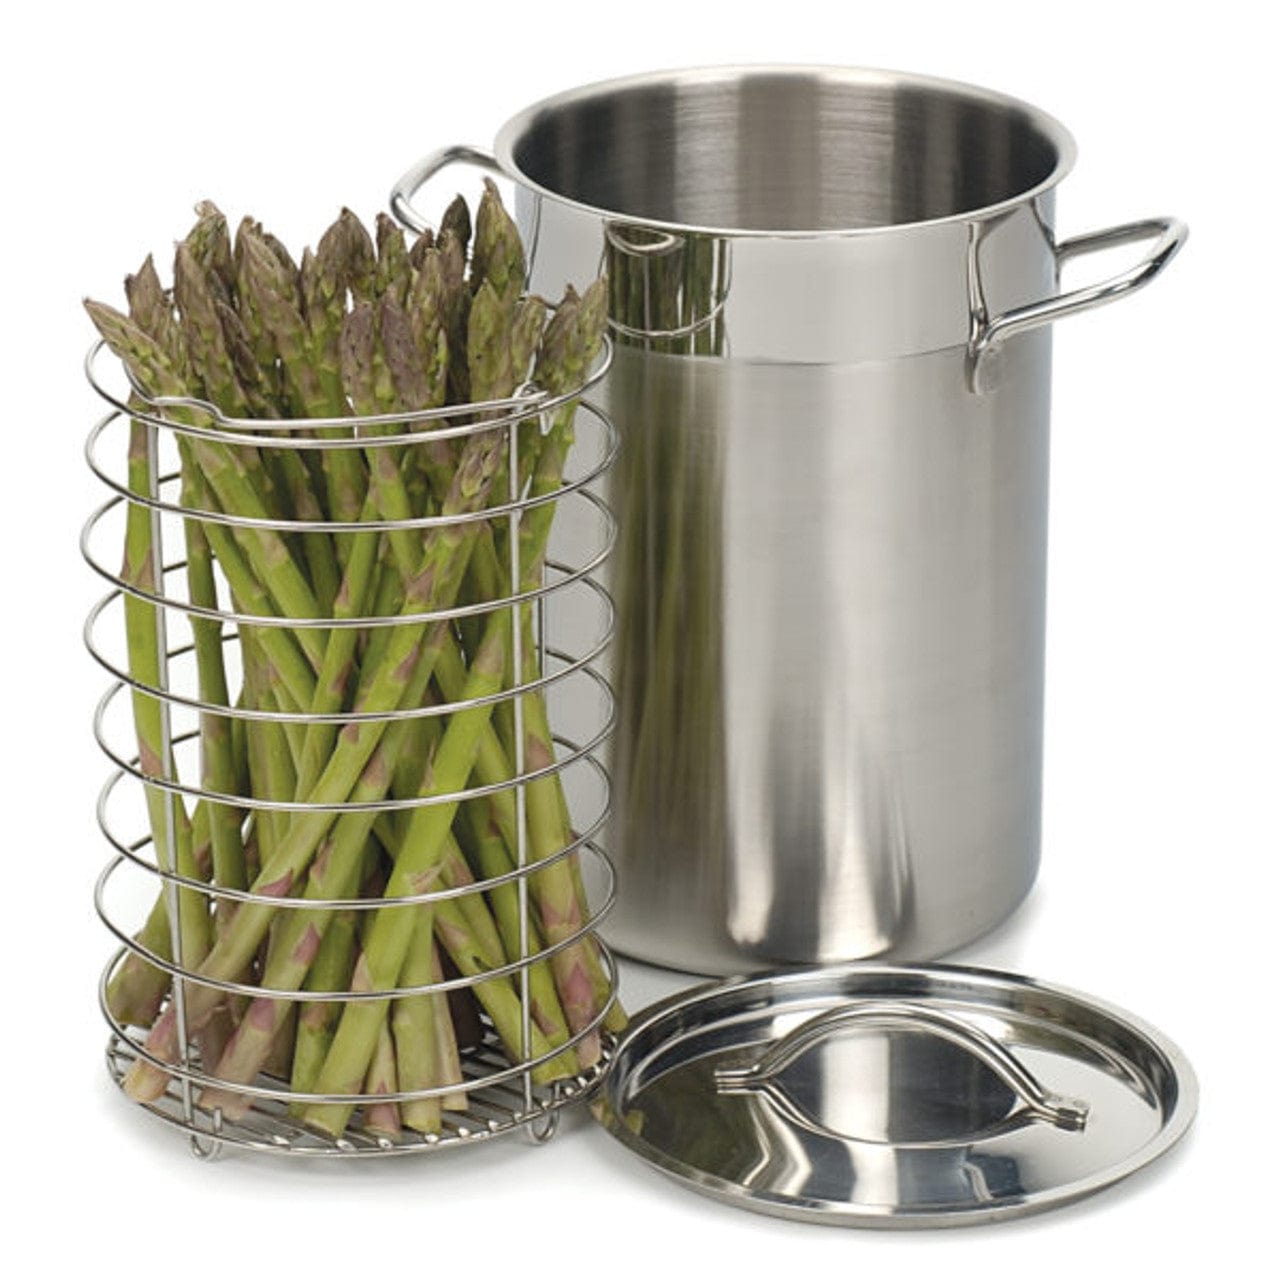 Demeyere Steamers & Double Boilers RSVP Stainless Steel Asparagus Steamer